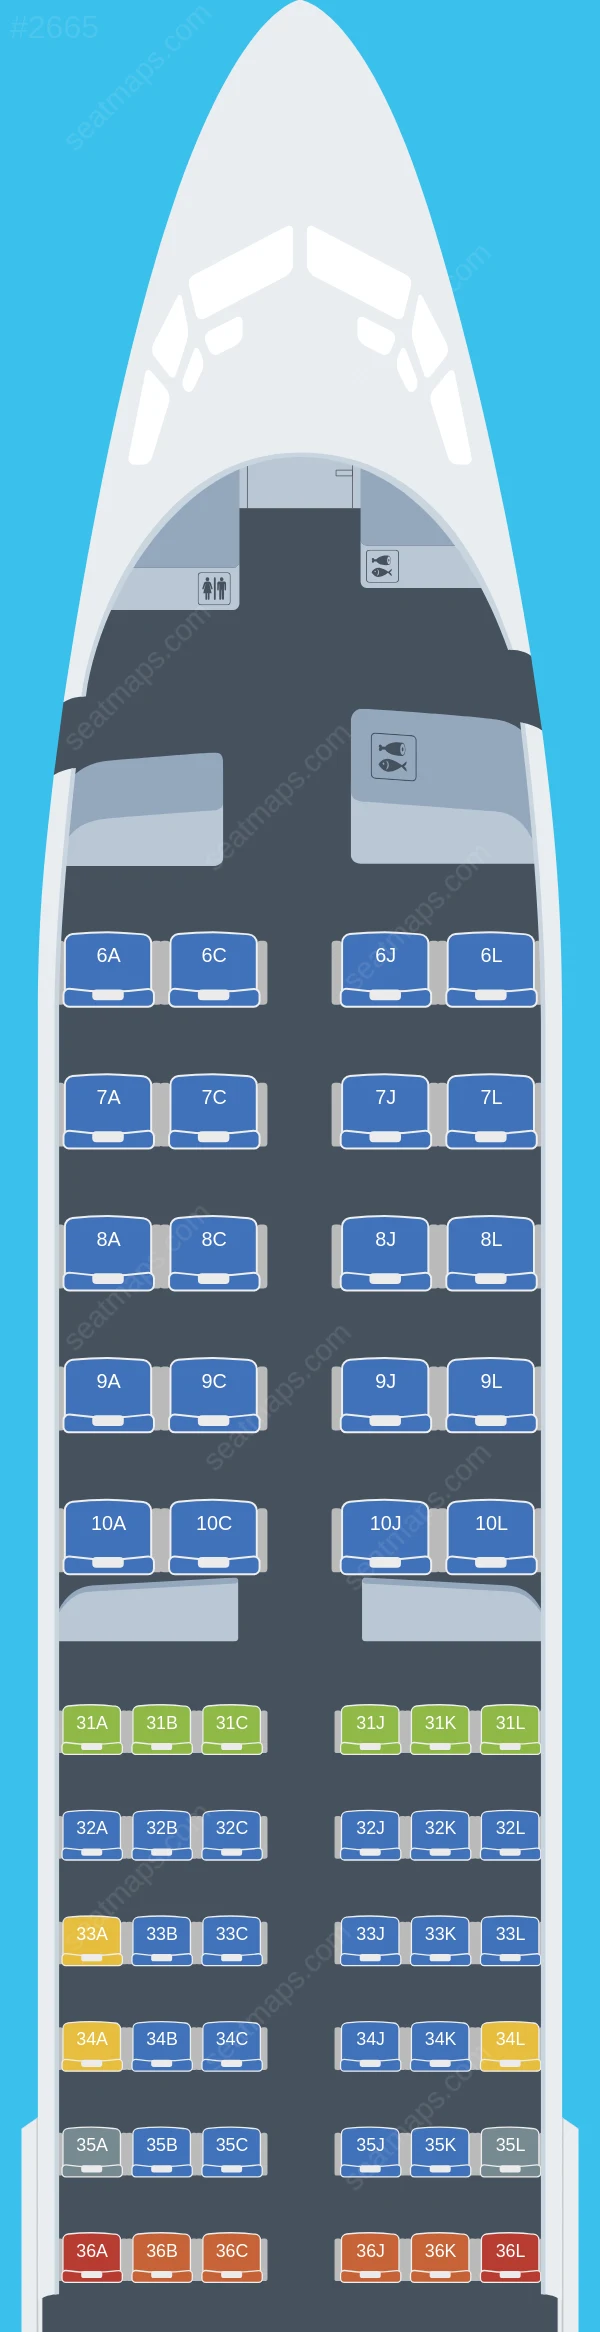 China Eastern Boeing 737-800 V.3 seatmap preview